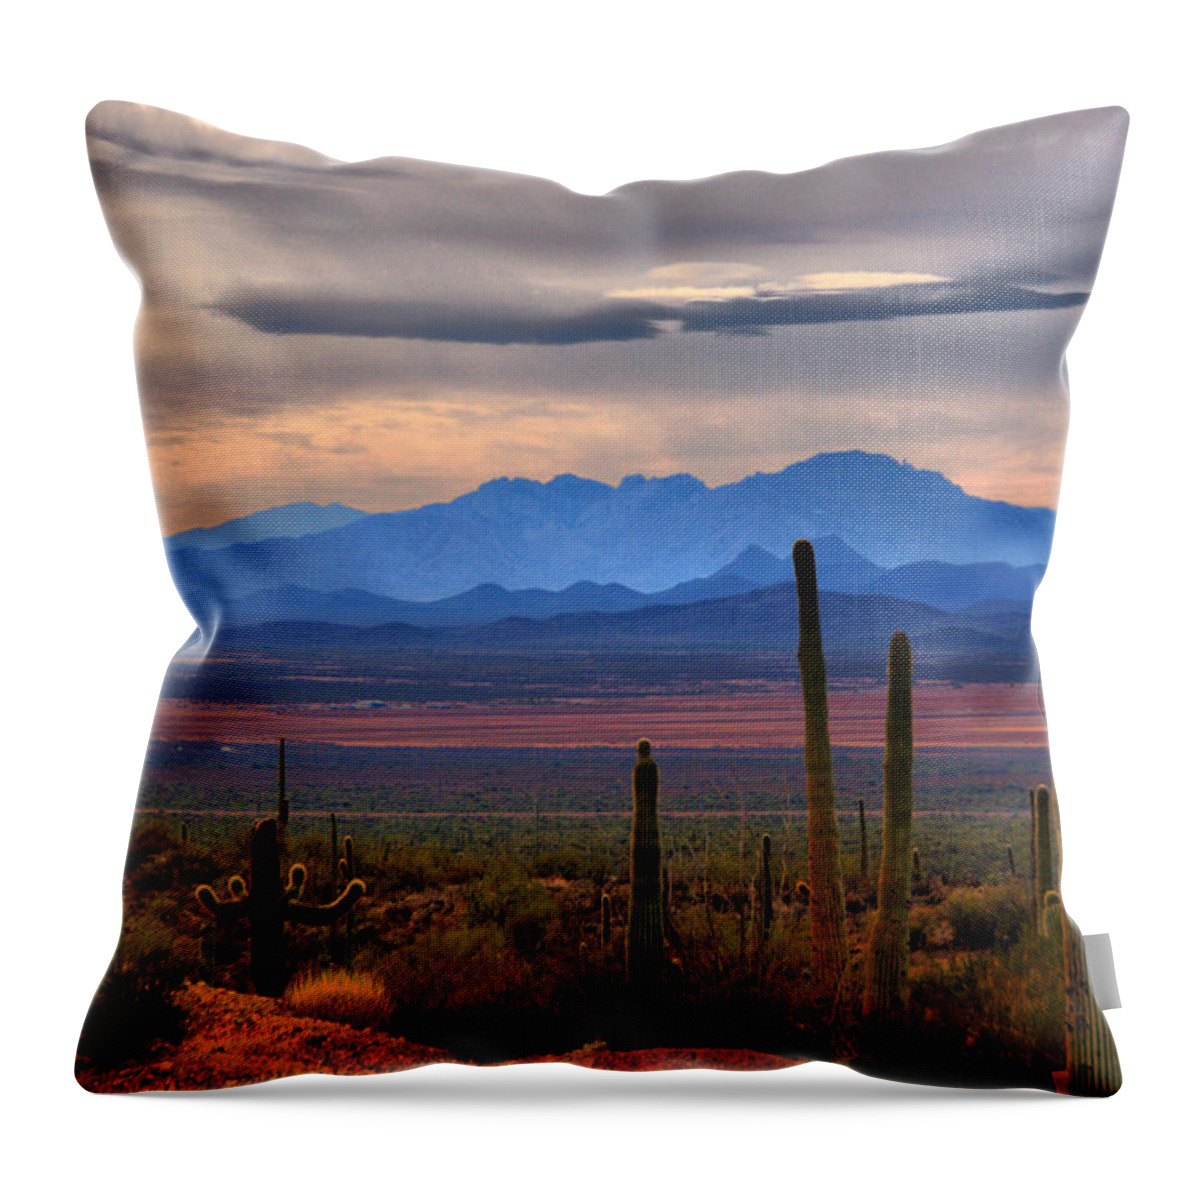 Scenics Throw Pillow featuring the photograph Sonoran Desert Floor by Lawrence Goldman Photography